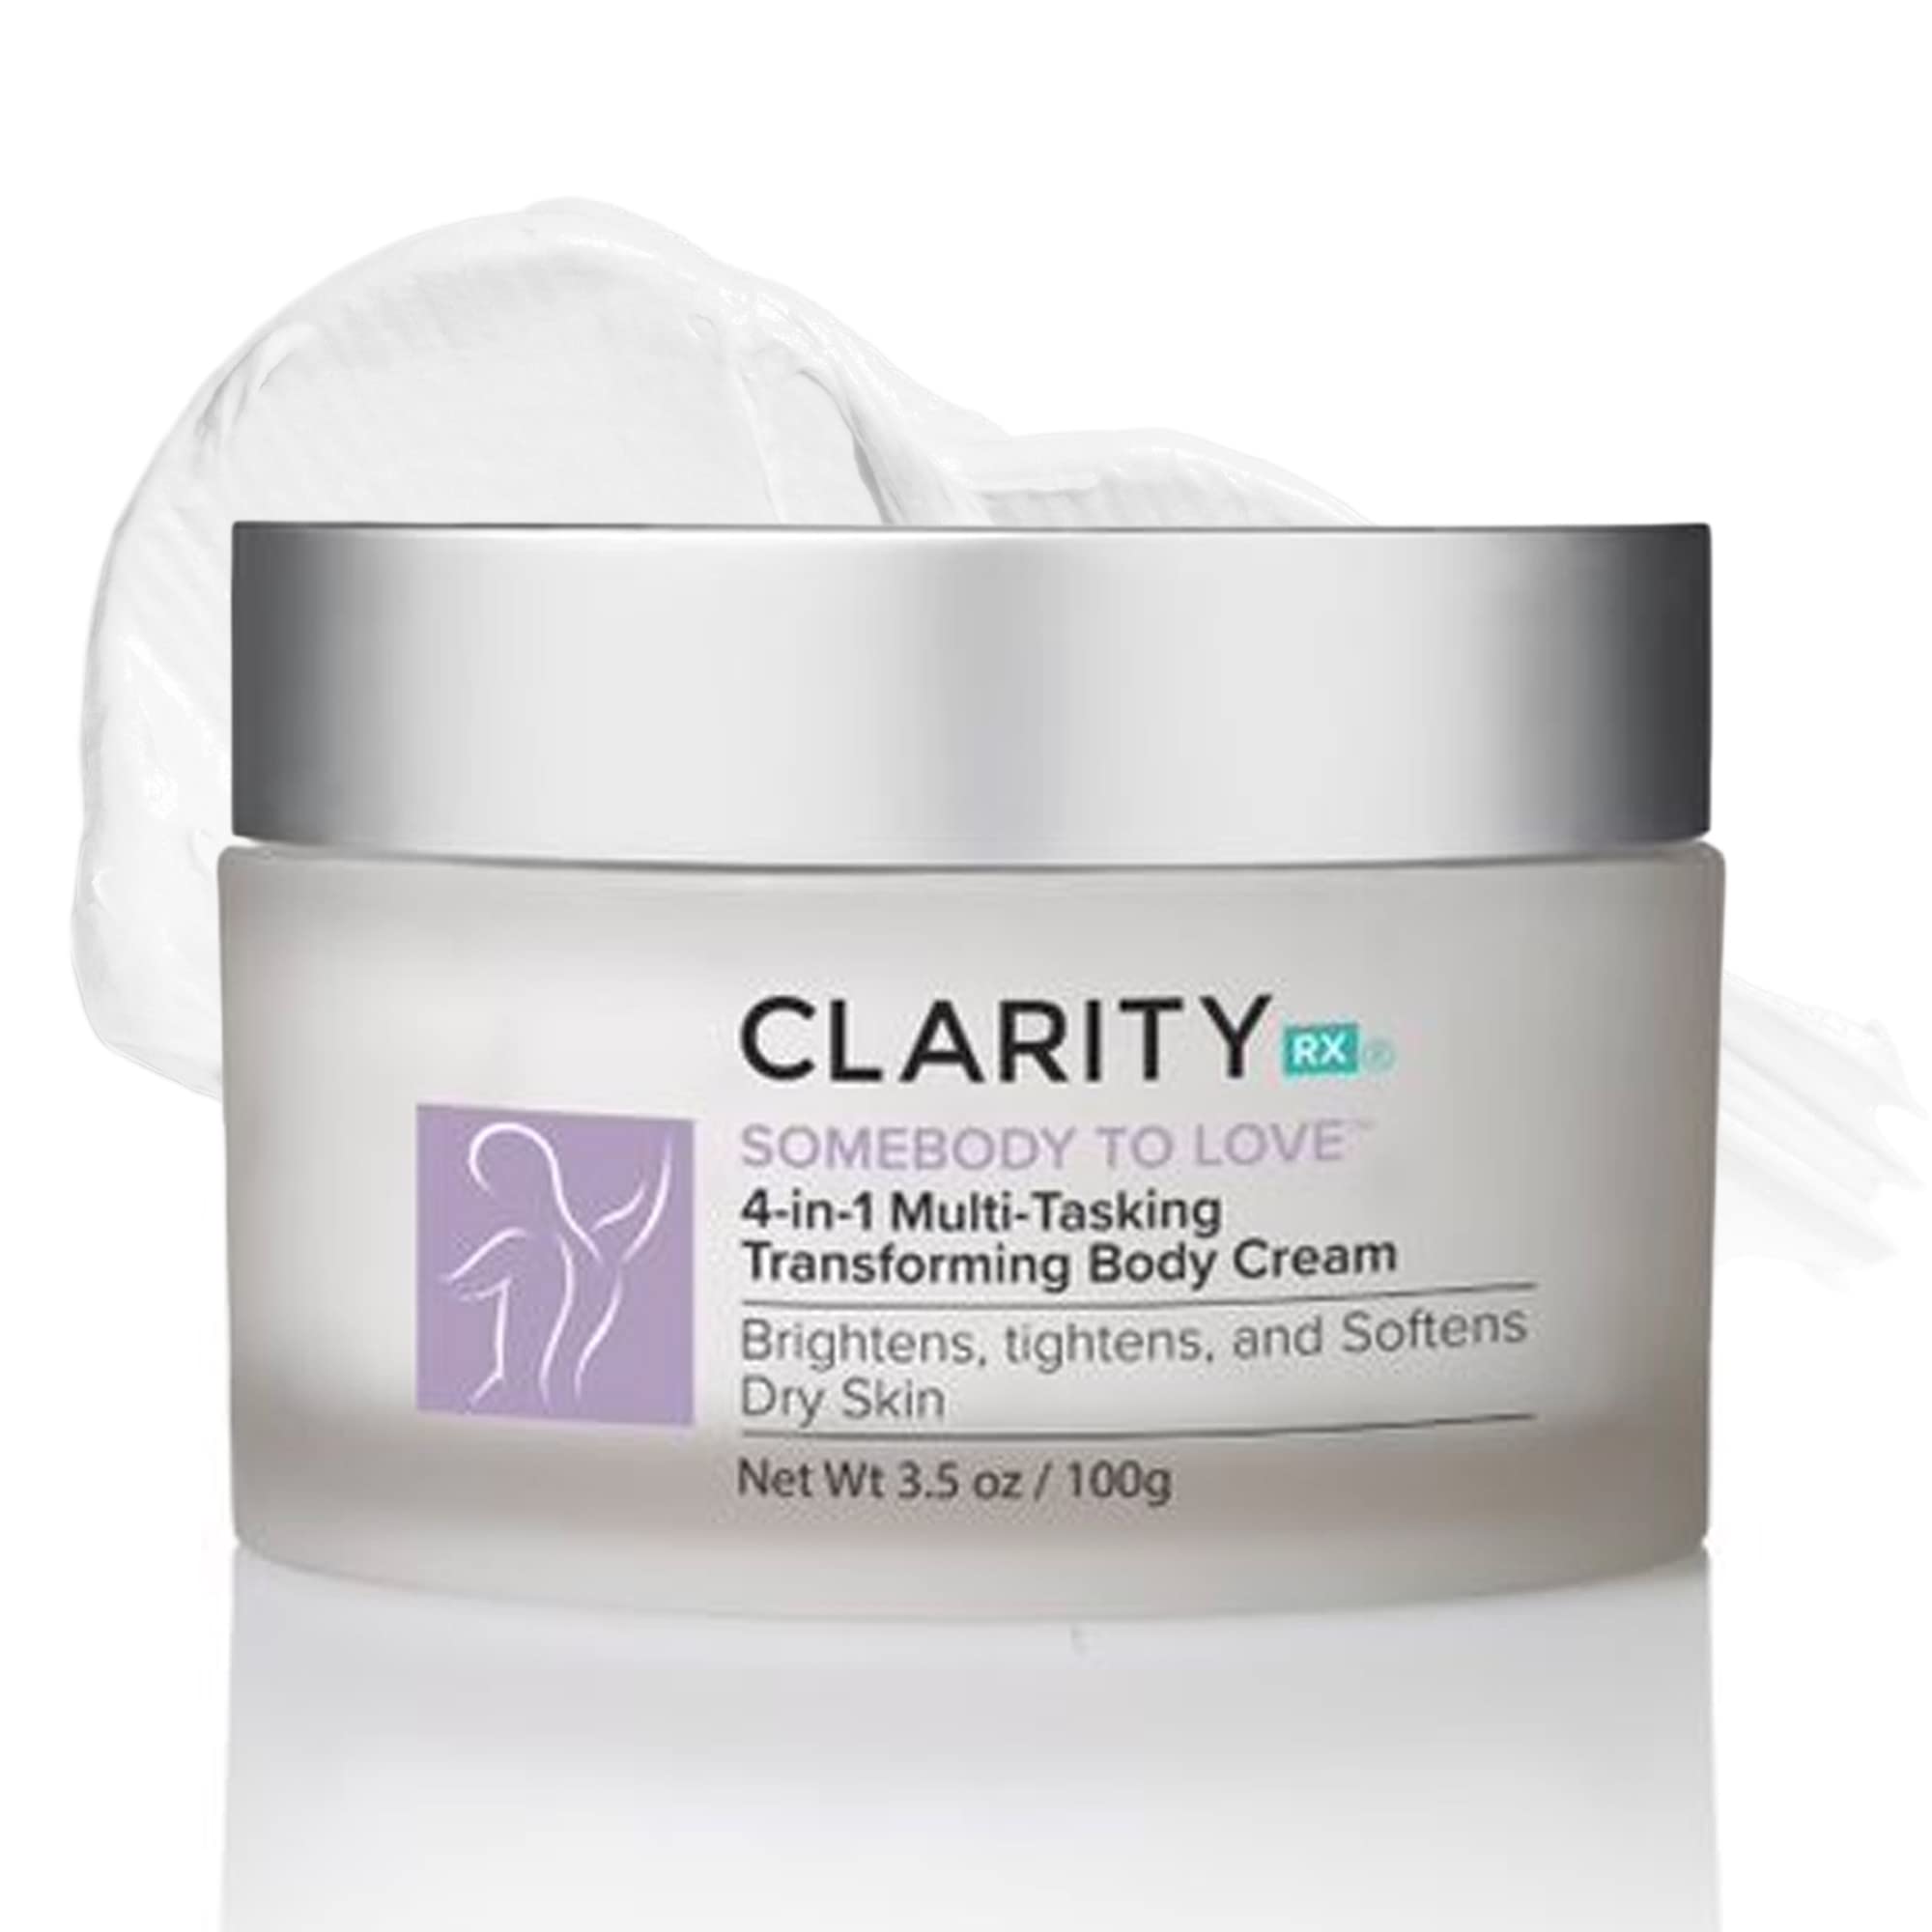 ClarityRx SomeBODY To Love 4-in-1 Anti-Aging Body Cream, Natural Plant-Based Moisturizing Lotion for Brightening, Tightening & Smoothing Dry Skin (3.5 oz)